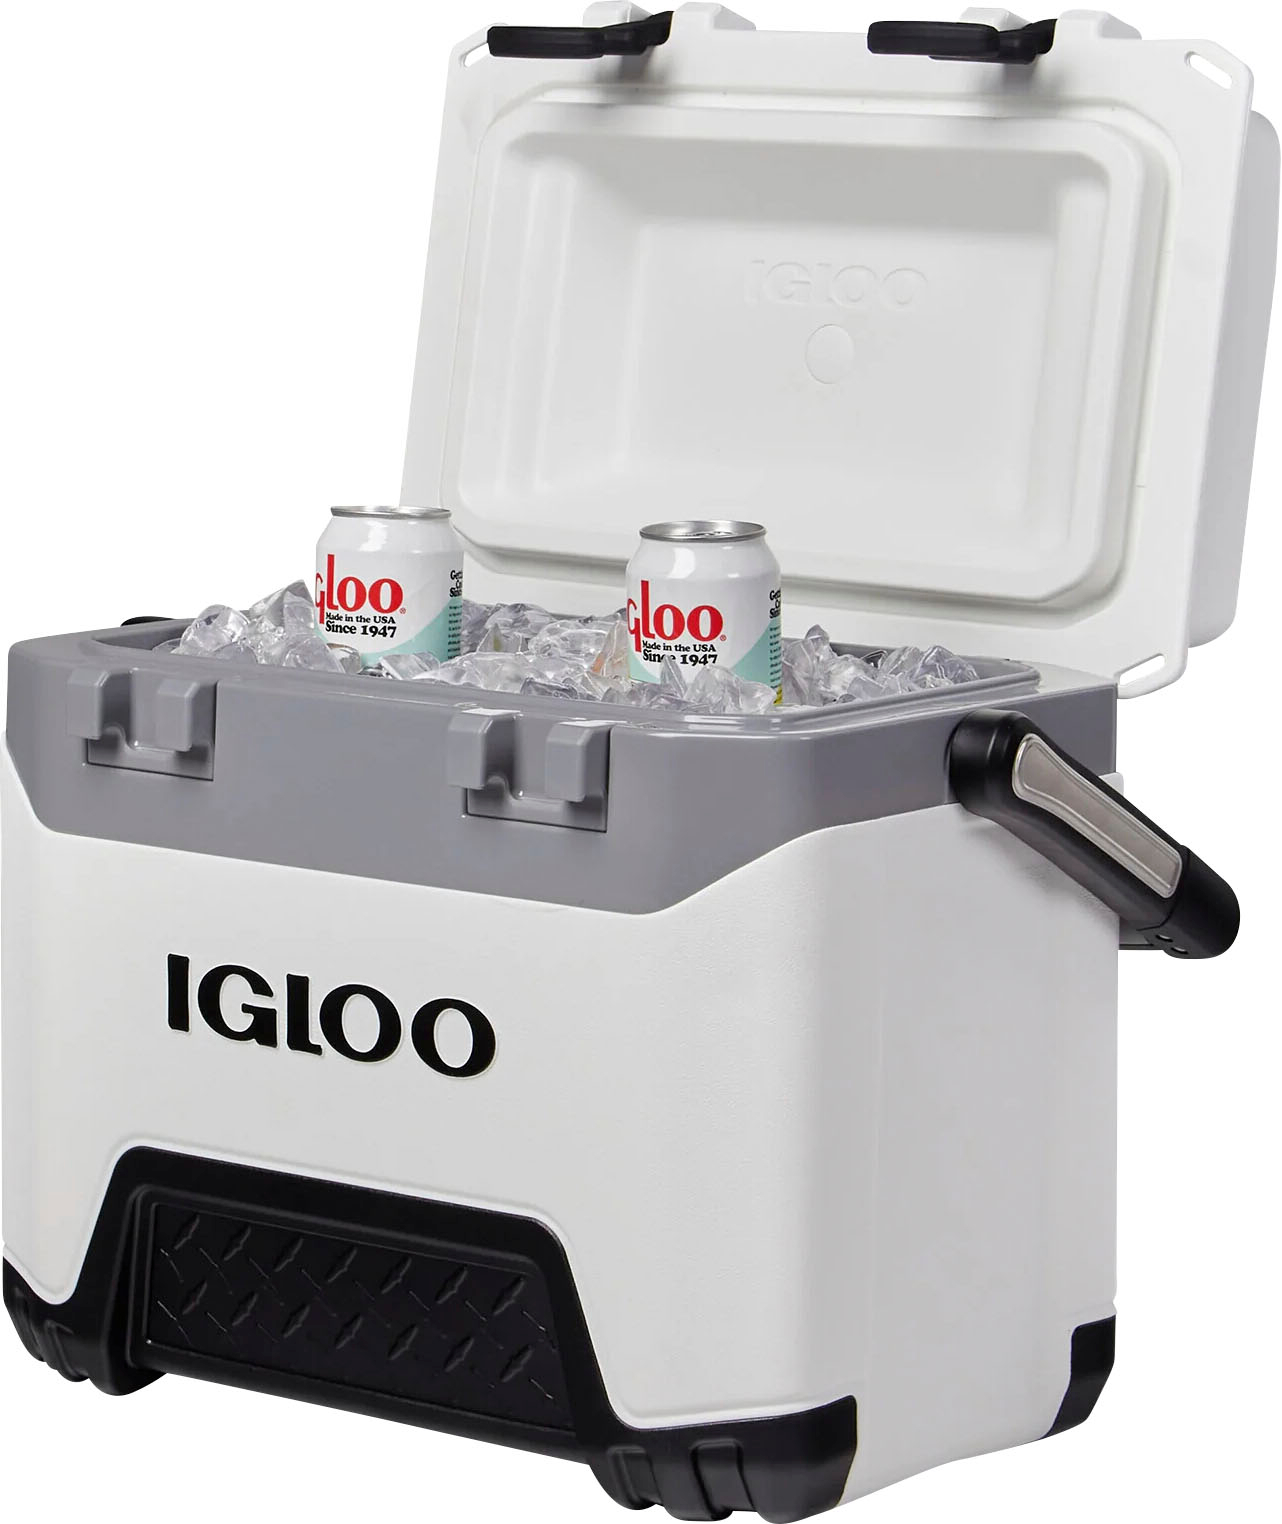 Best Igloo Thermos for sale in Minot, North Dakota for 2023